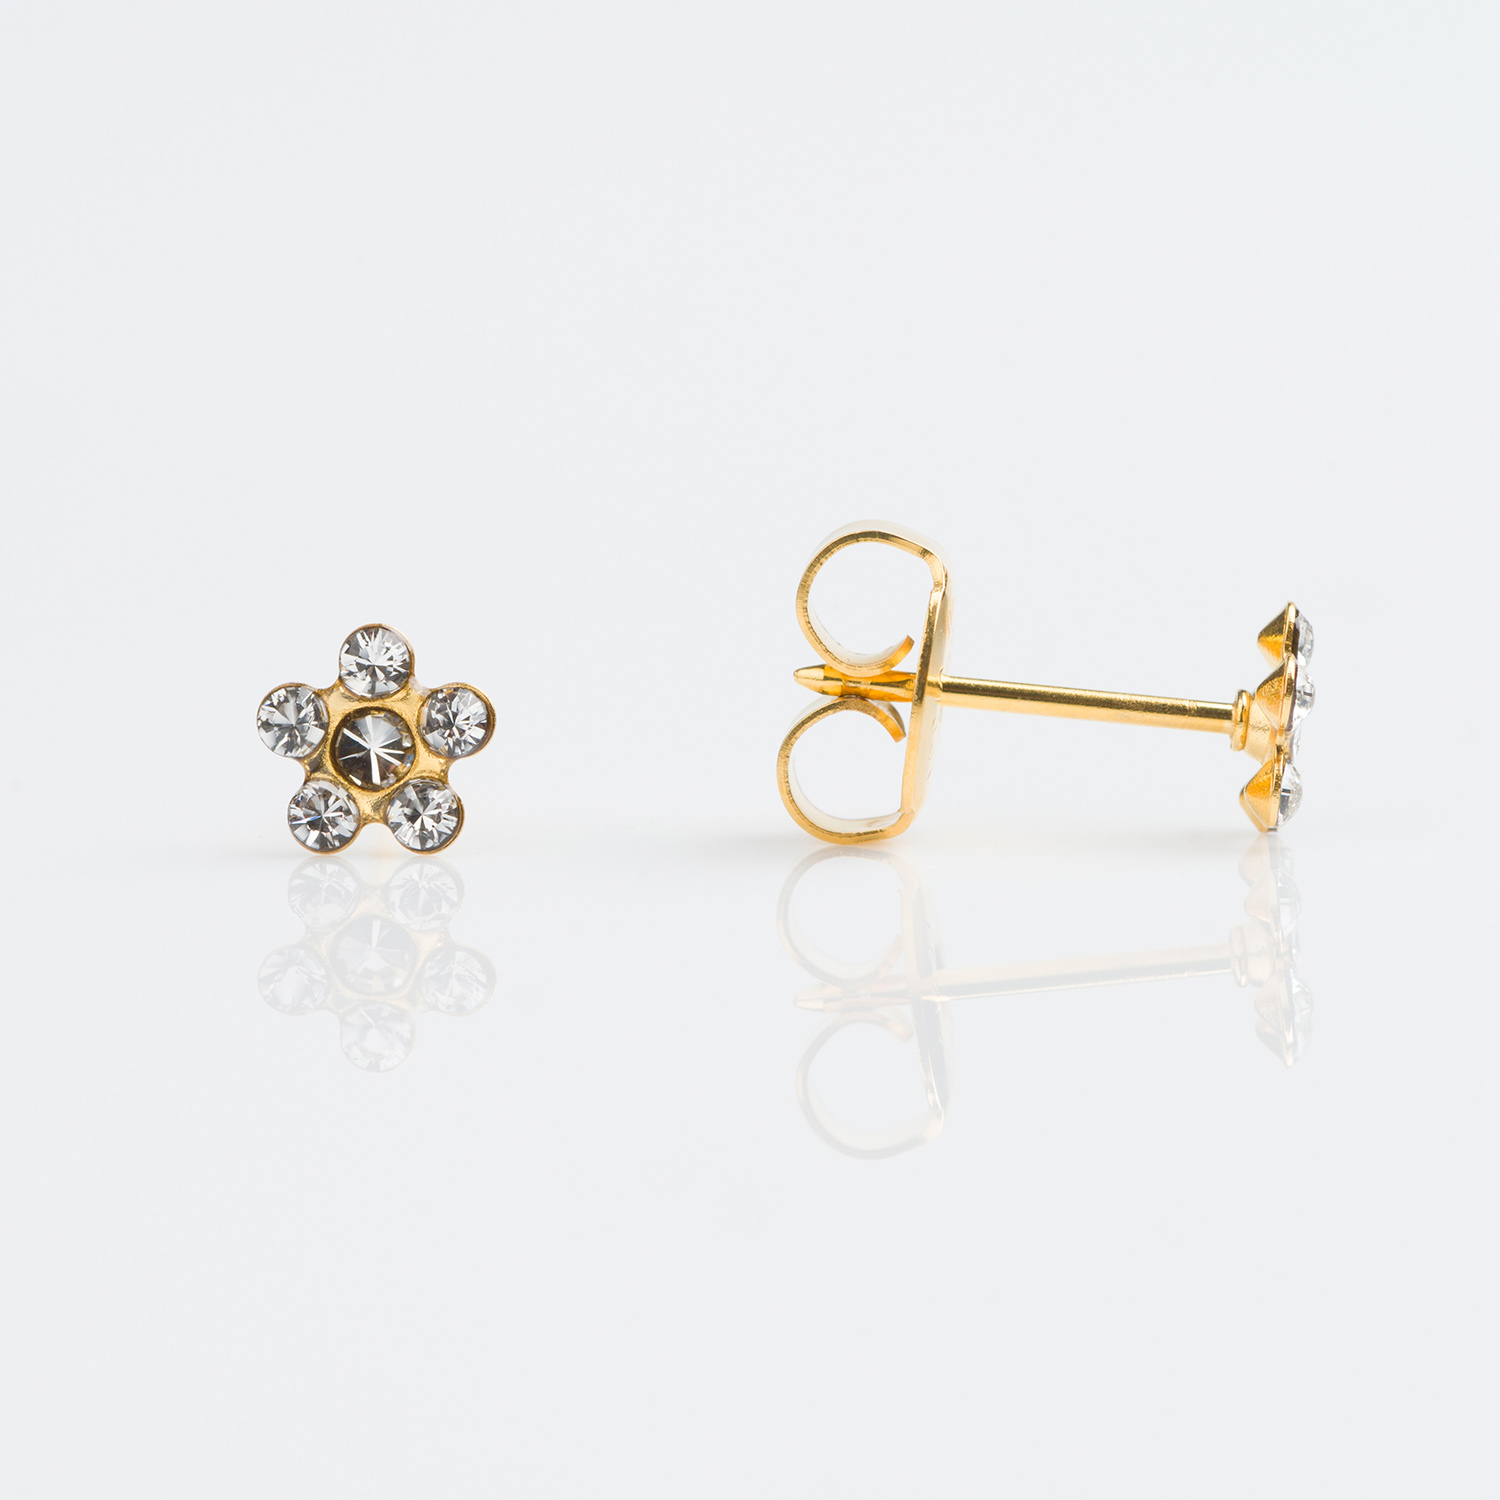 S6004STX – Studex Sensitive Gold Plated Daisy April Crystal Stud Earrings Made In Usa